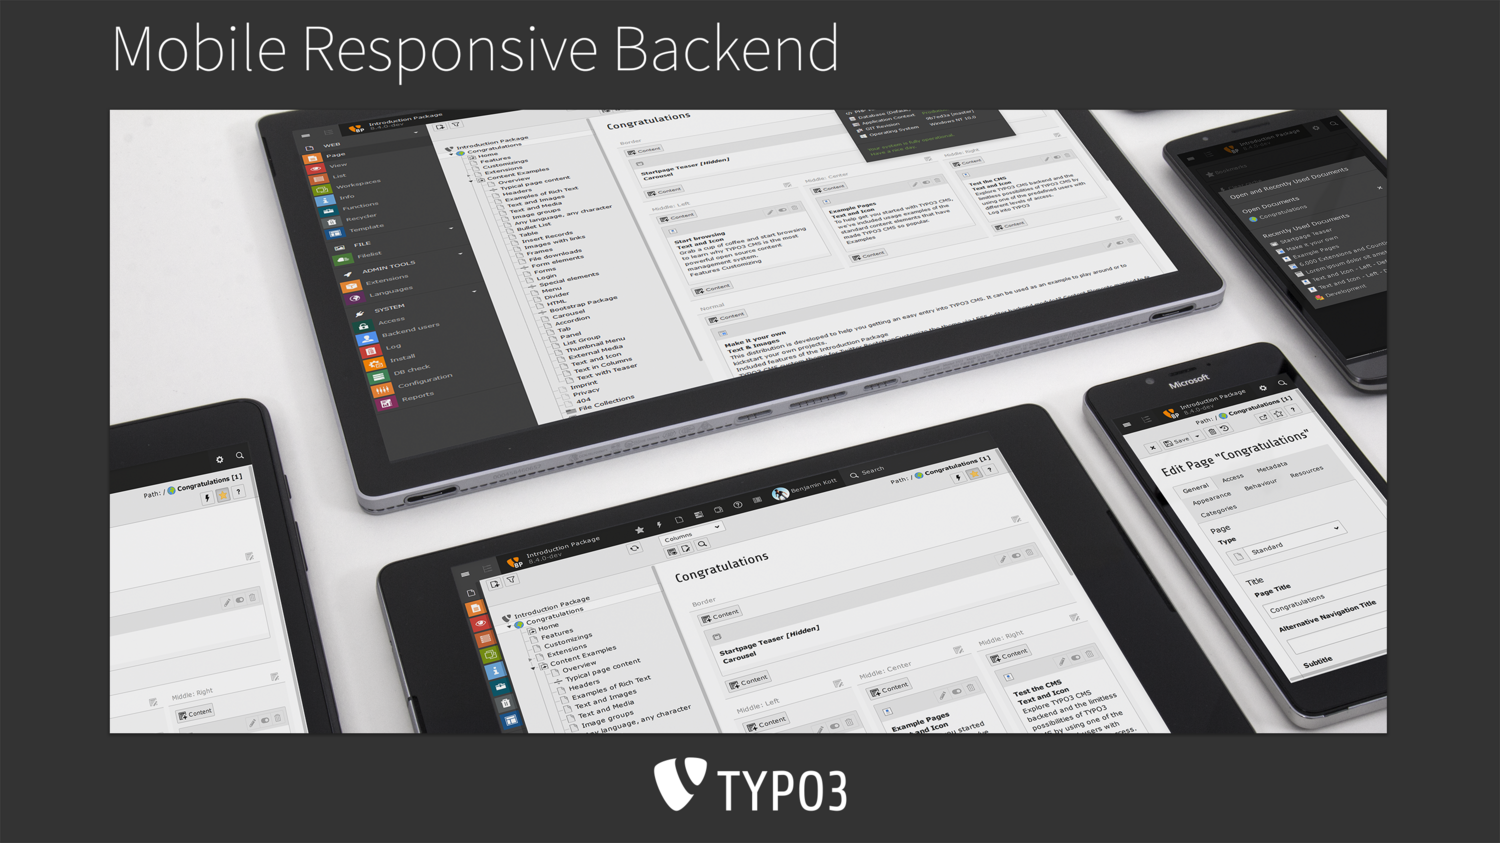 Mobile responsive backend